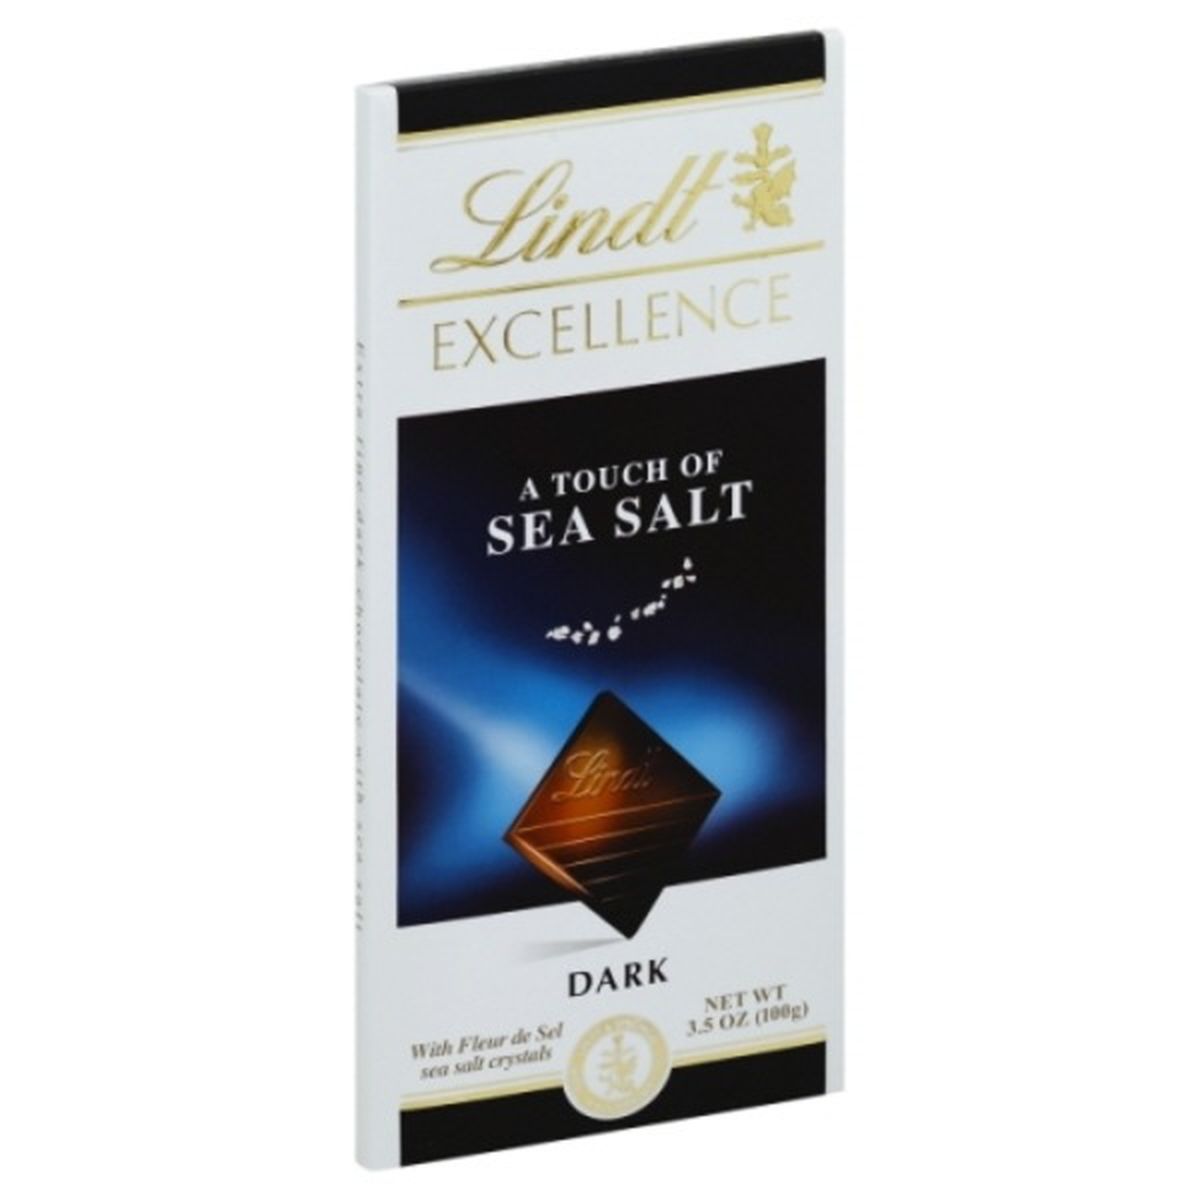 Calories in Lindt Excellence Dark Chocolate, A Touch of Sea Salt